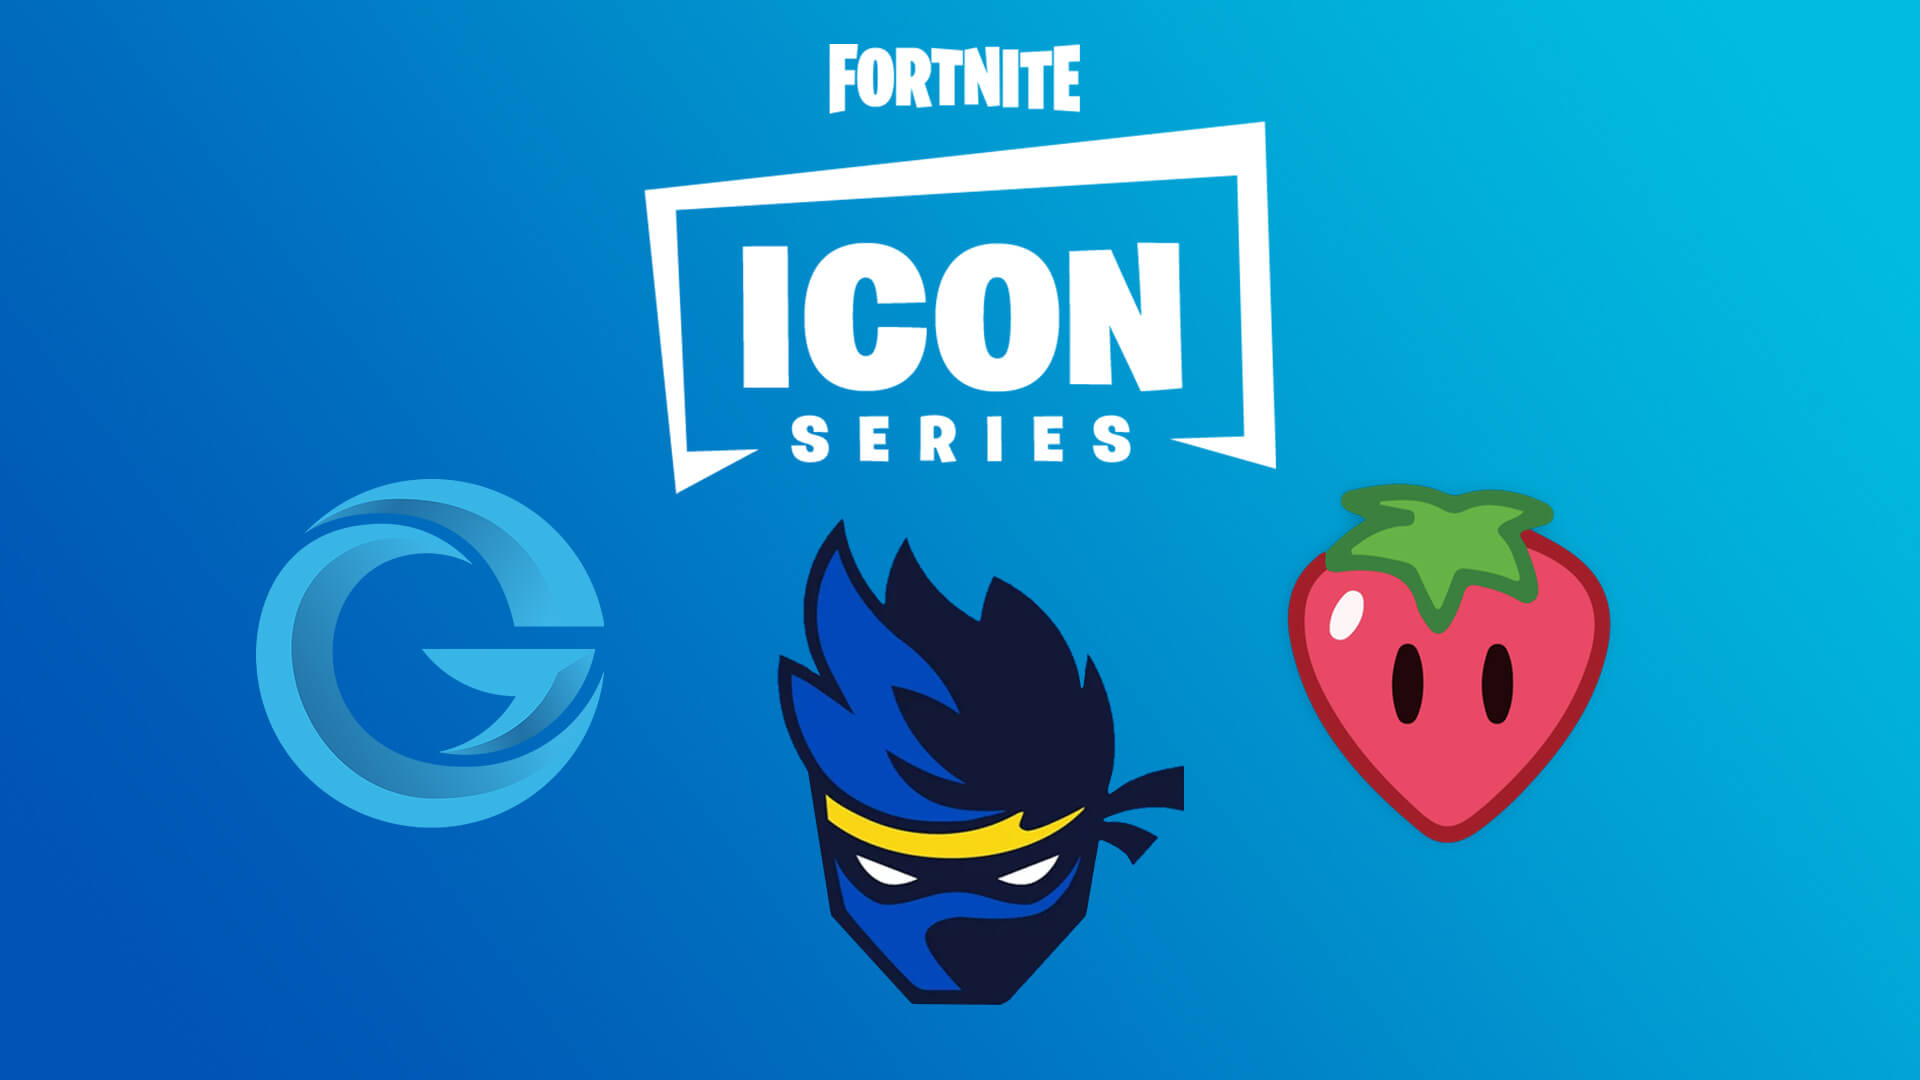 Every Fortnite Icon Series Skin Emote And The Best Fan Concept